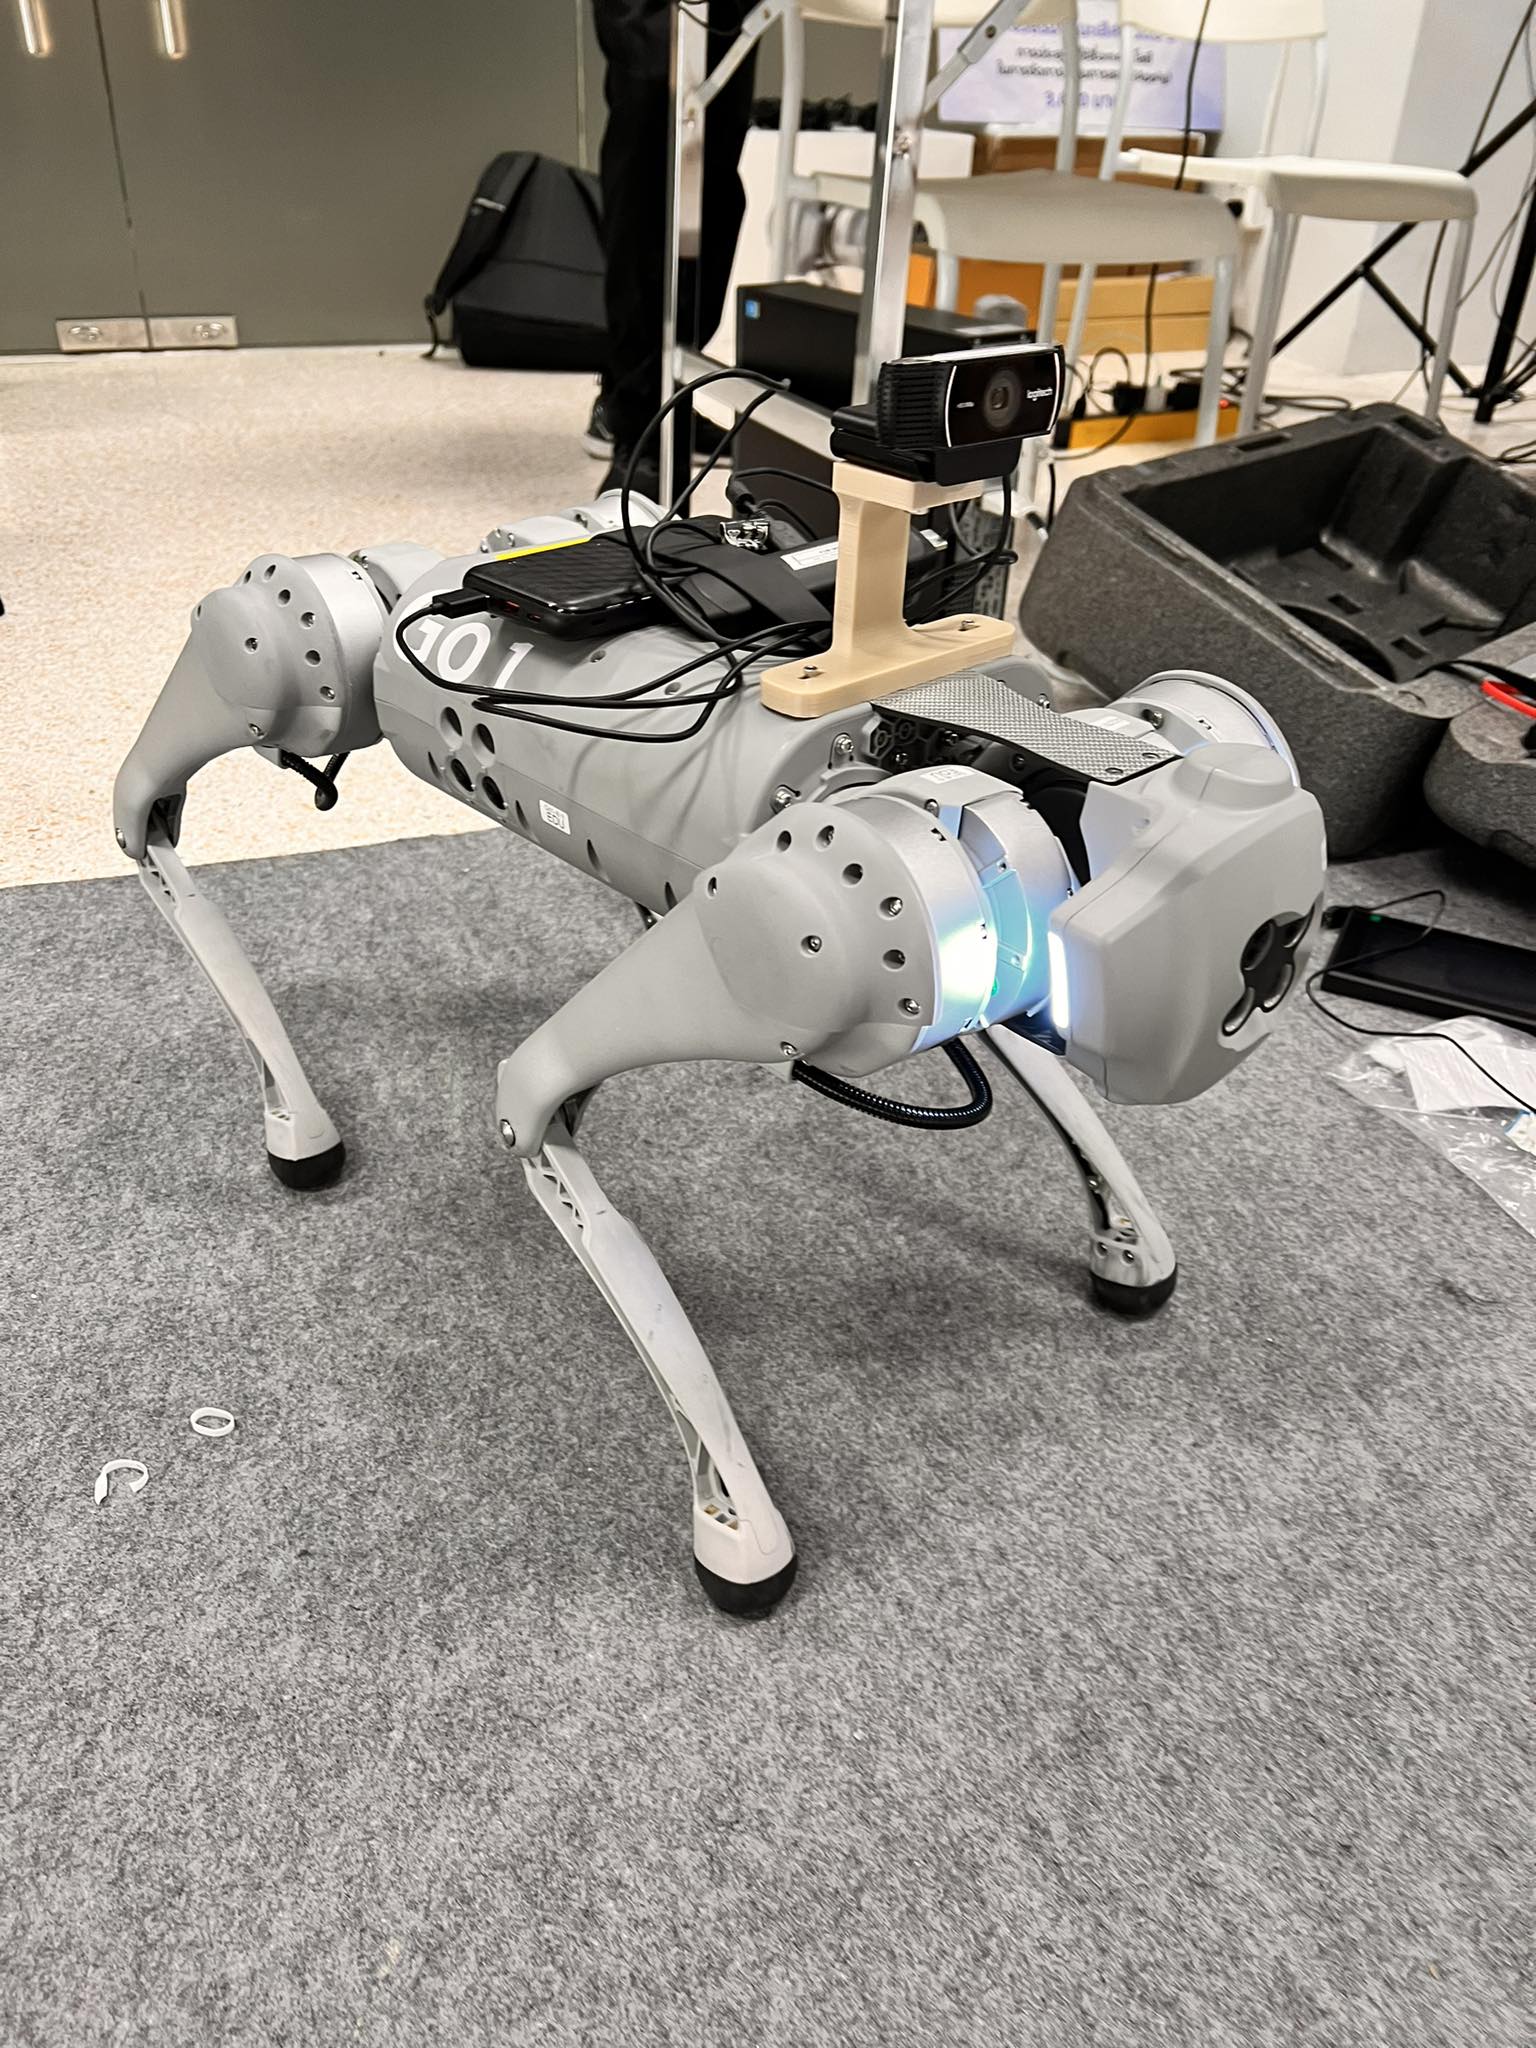 Class Project : Control Robodog with HoloLens and Streaming Robodog’s Vision with WebRTC